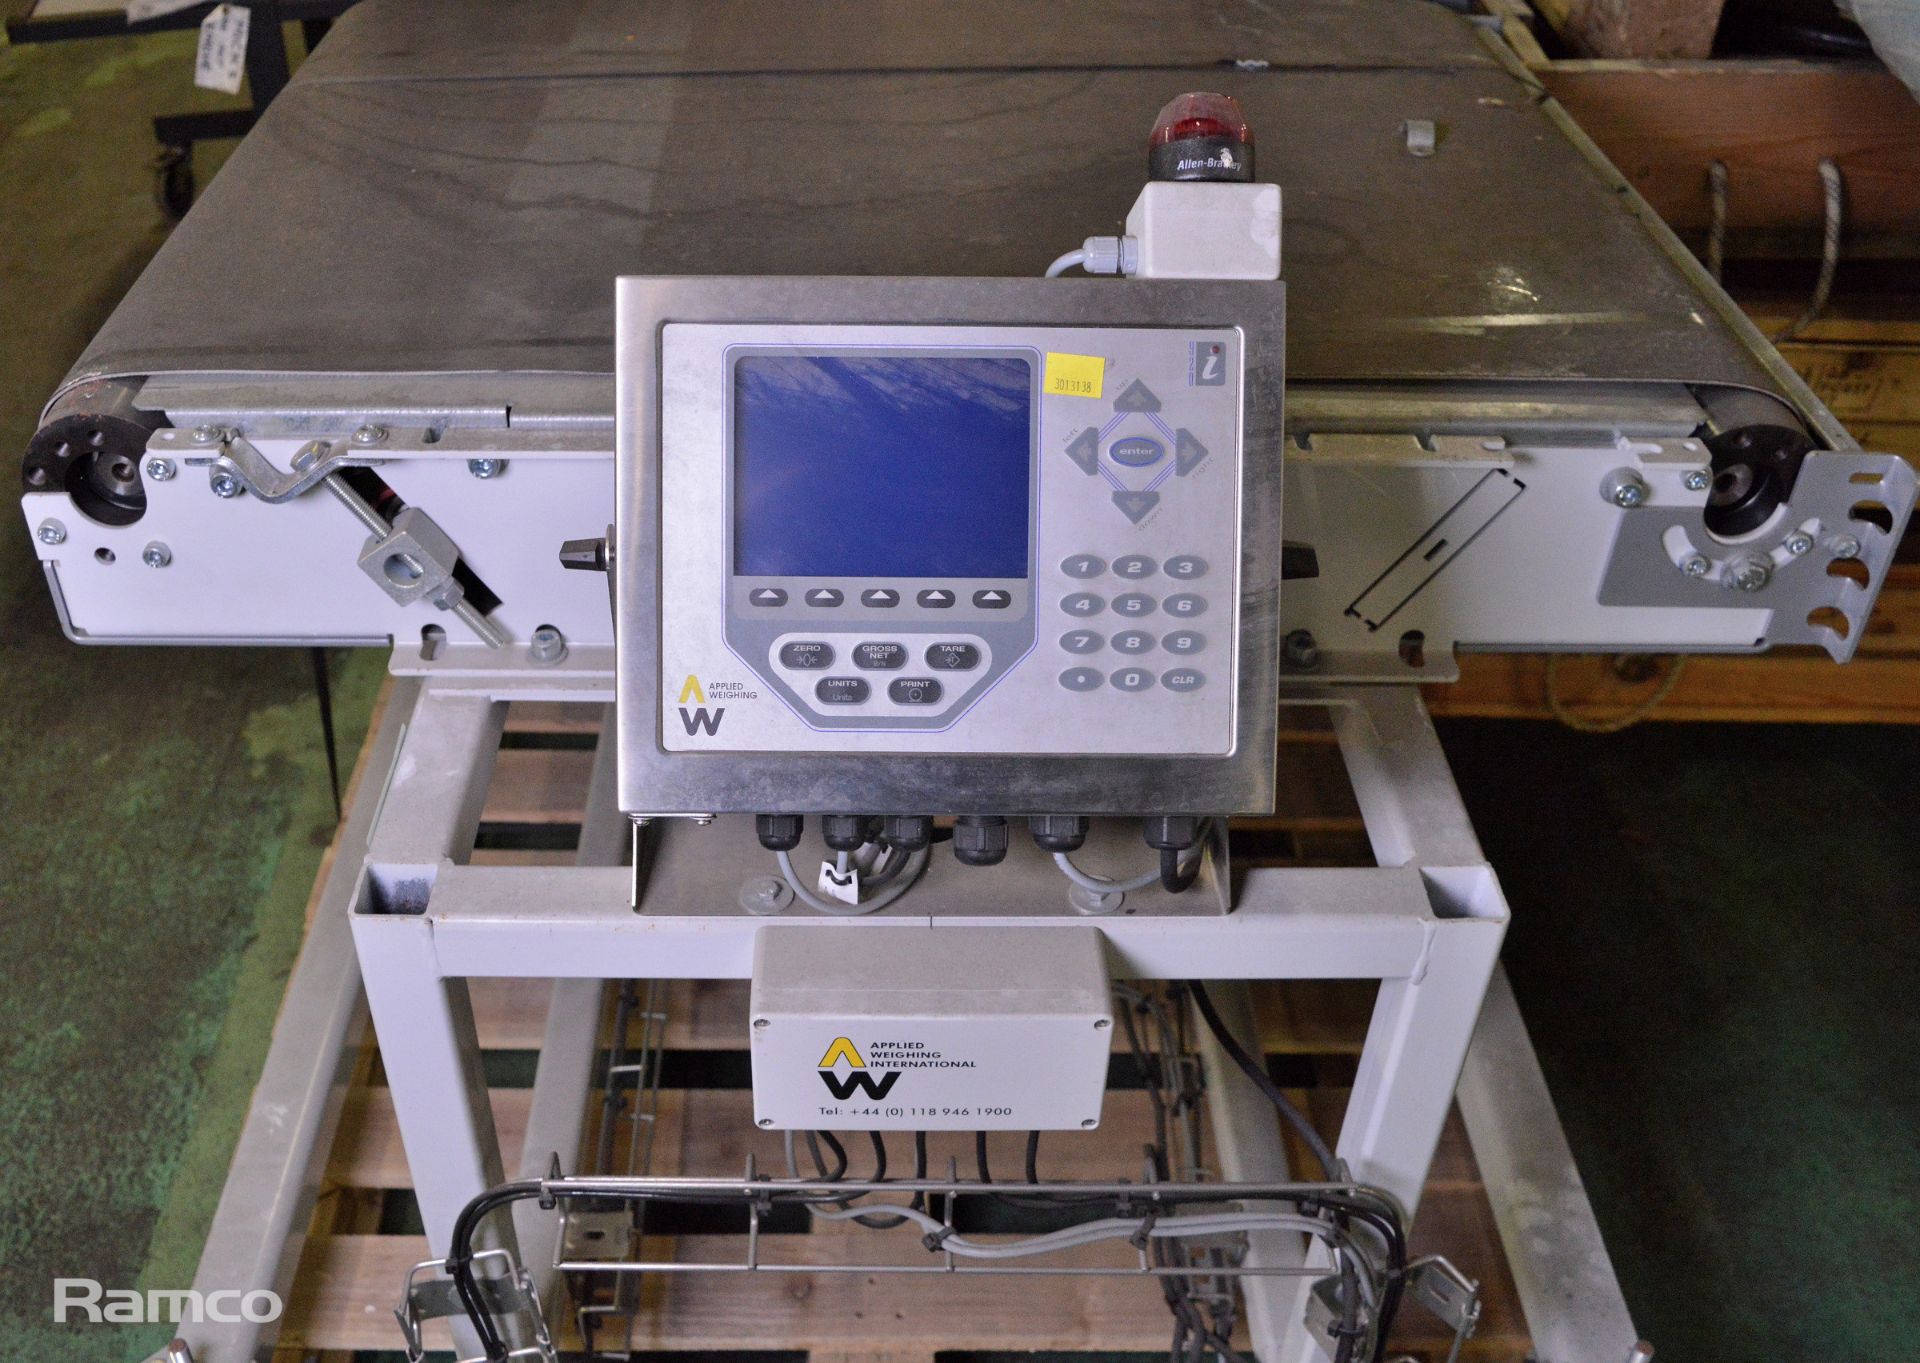 Applied Weighing Conveyor Belt Weighing System - W 950mm x D 1200mm x H 800mm - Image 3 of 7